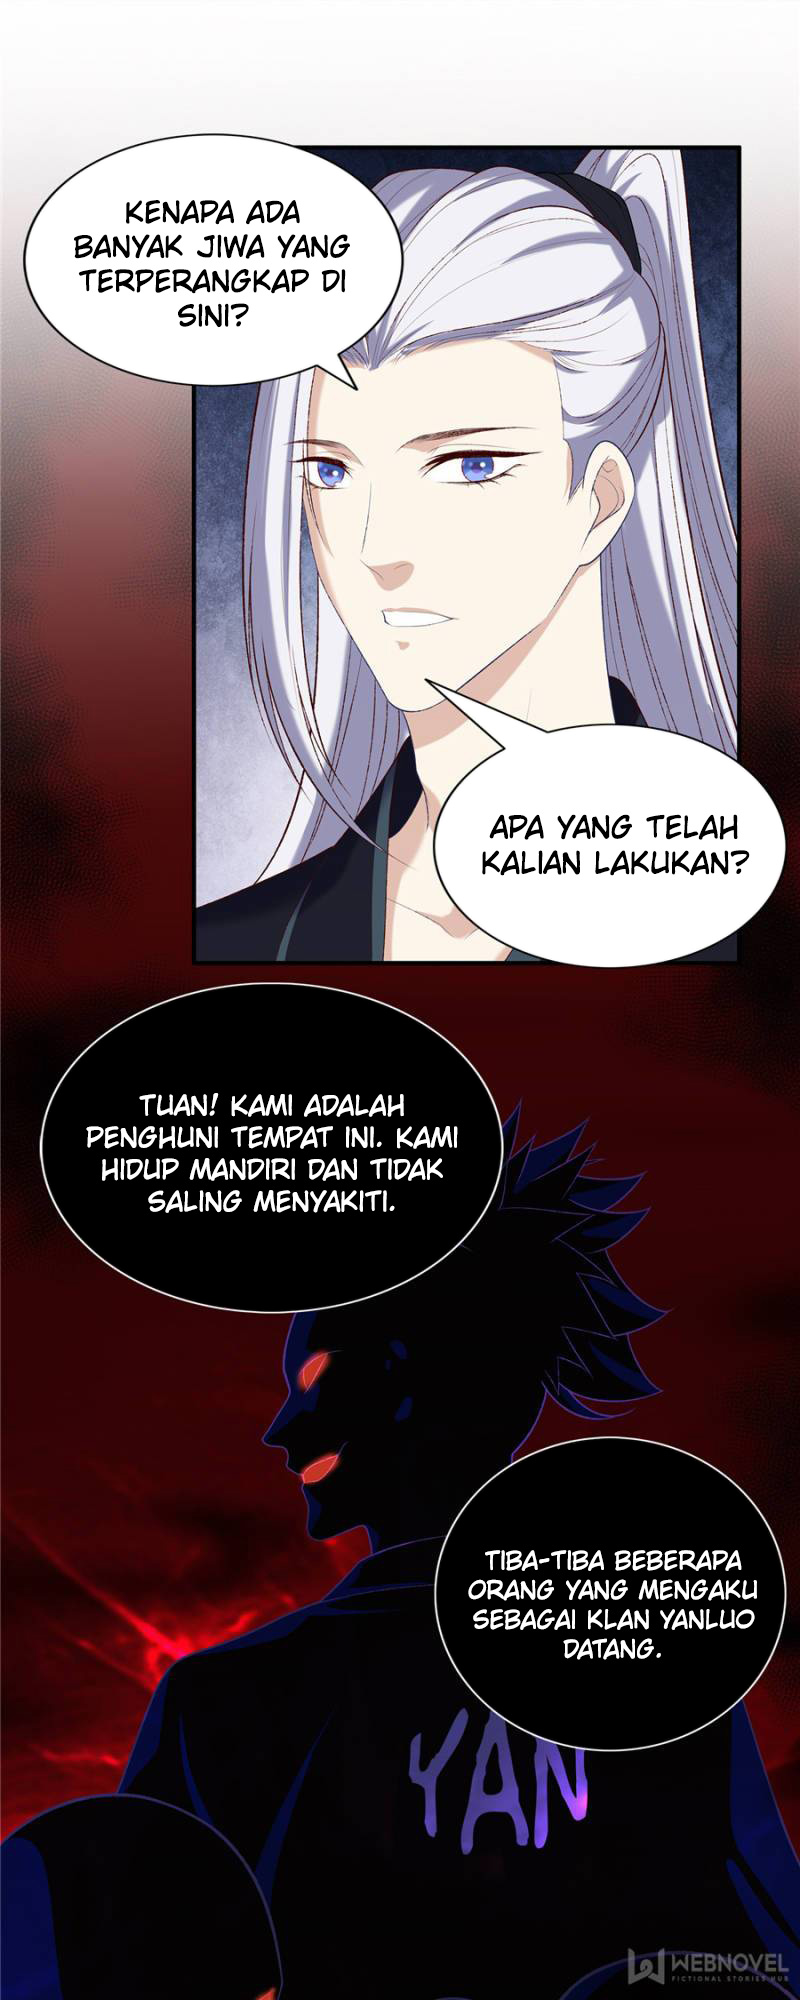 Strongest System Yan Luo Chapter 103